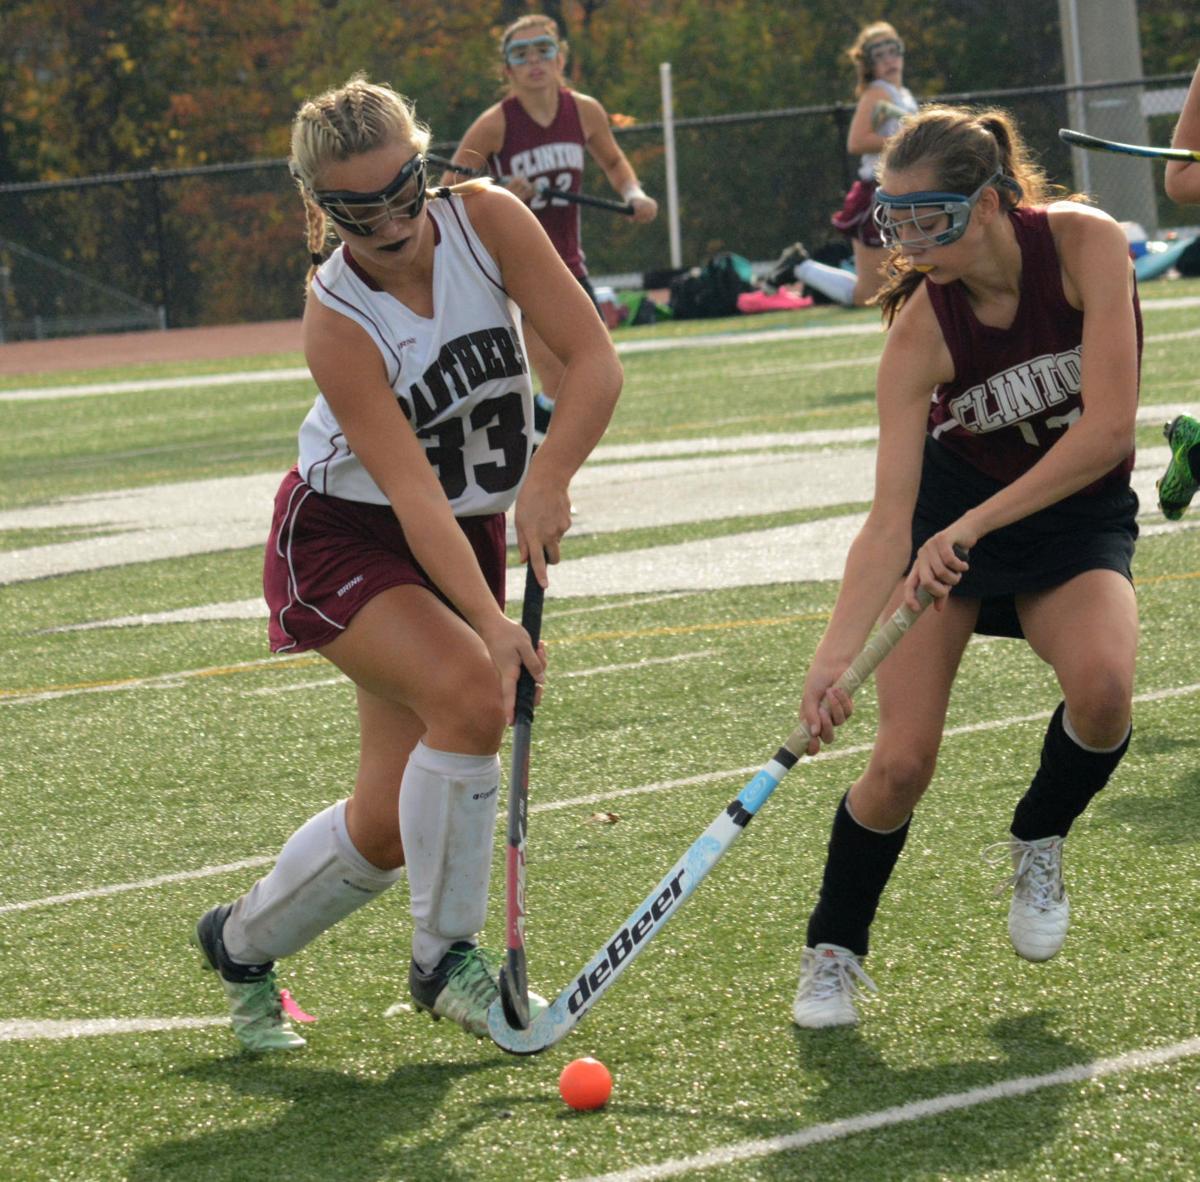 Port Byron field hockey team upset by Clinton in section semifinals ...